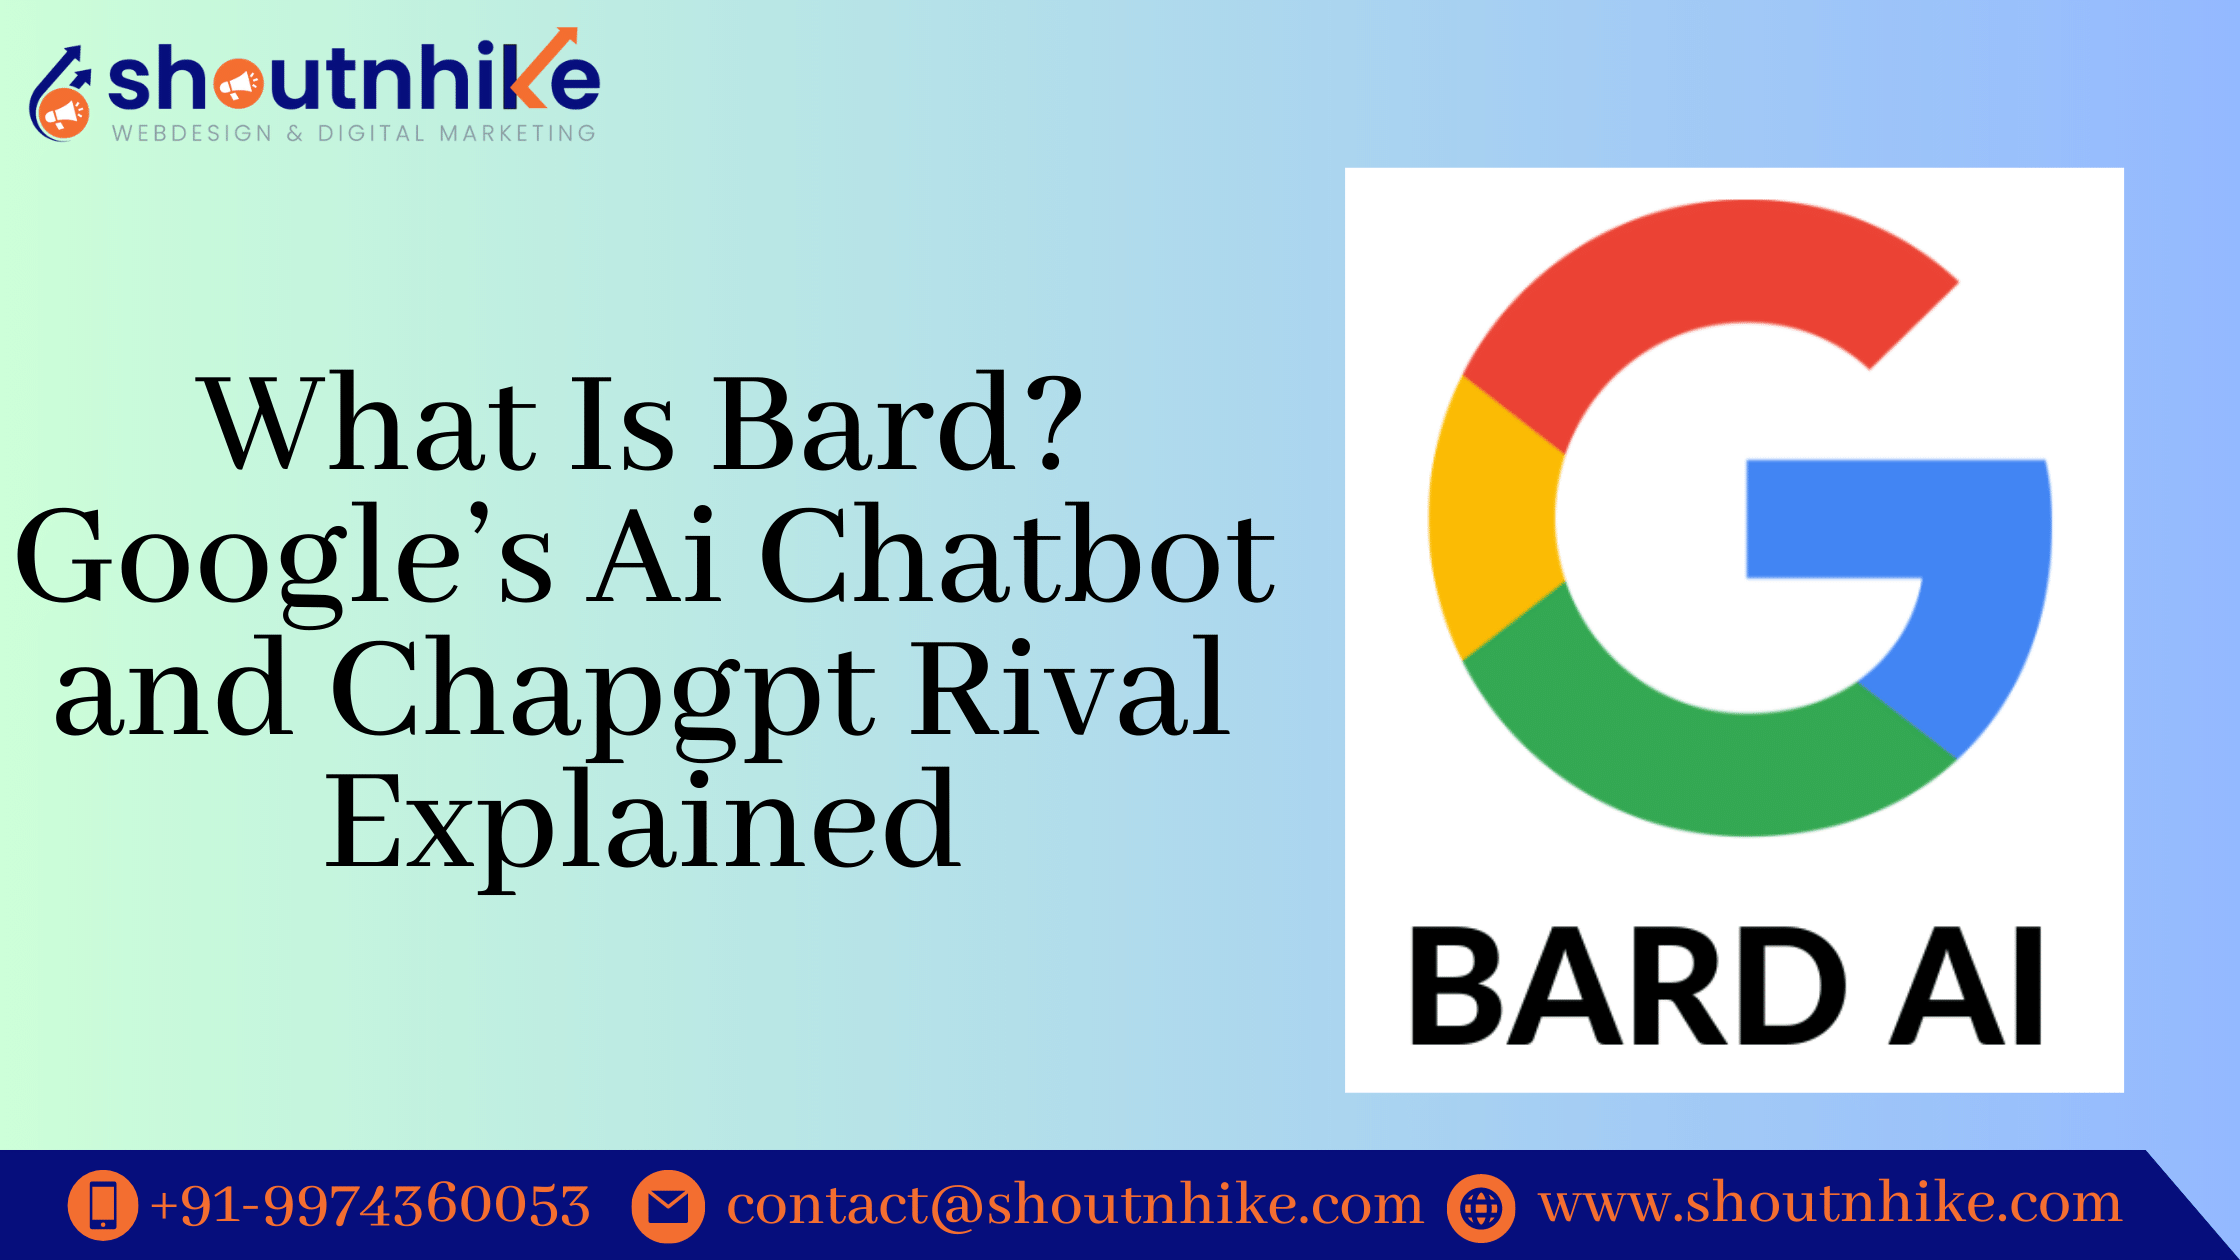 What Is Bard? Google’s Ai Chatbot and Chapgpt Rival Explained